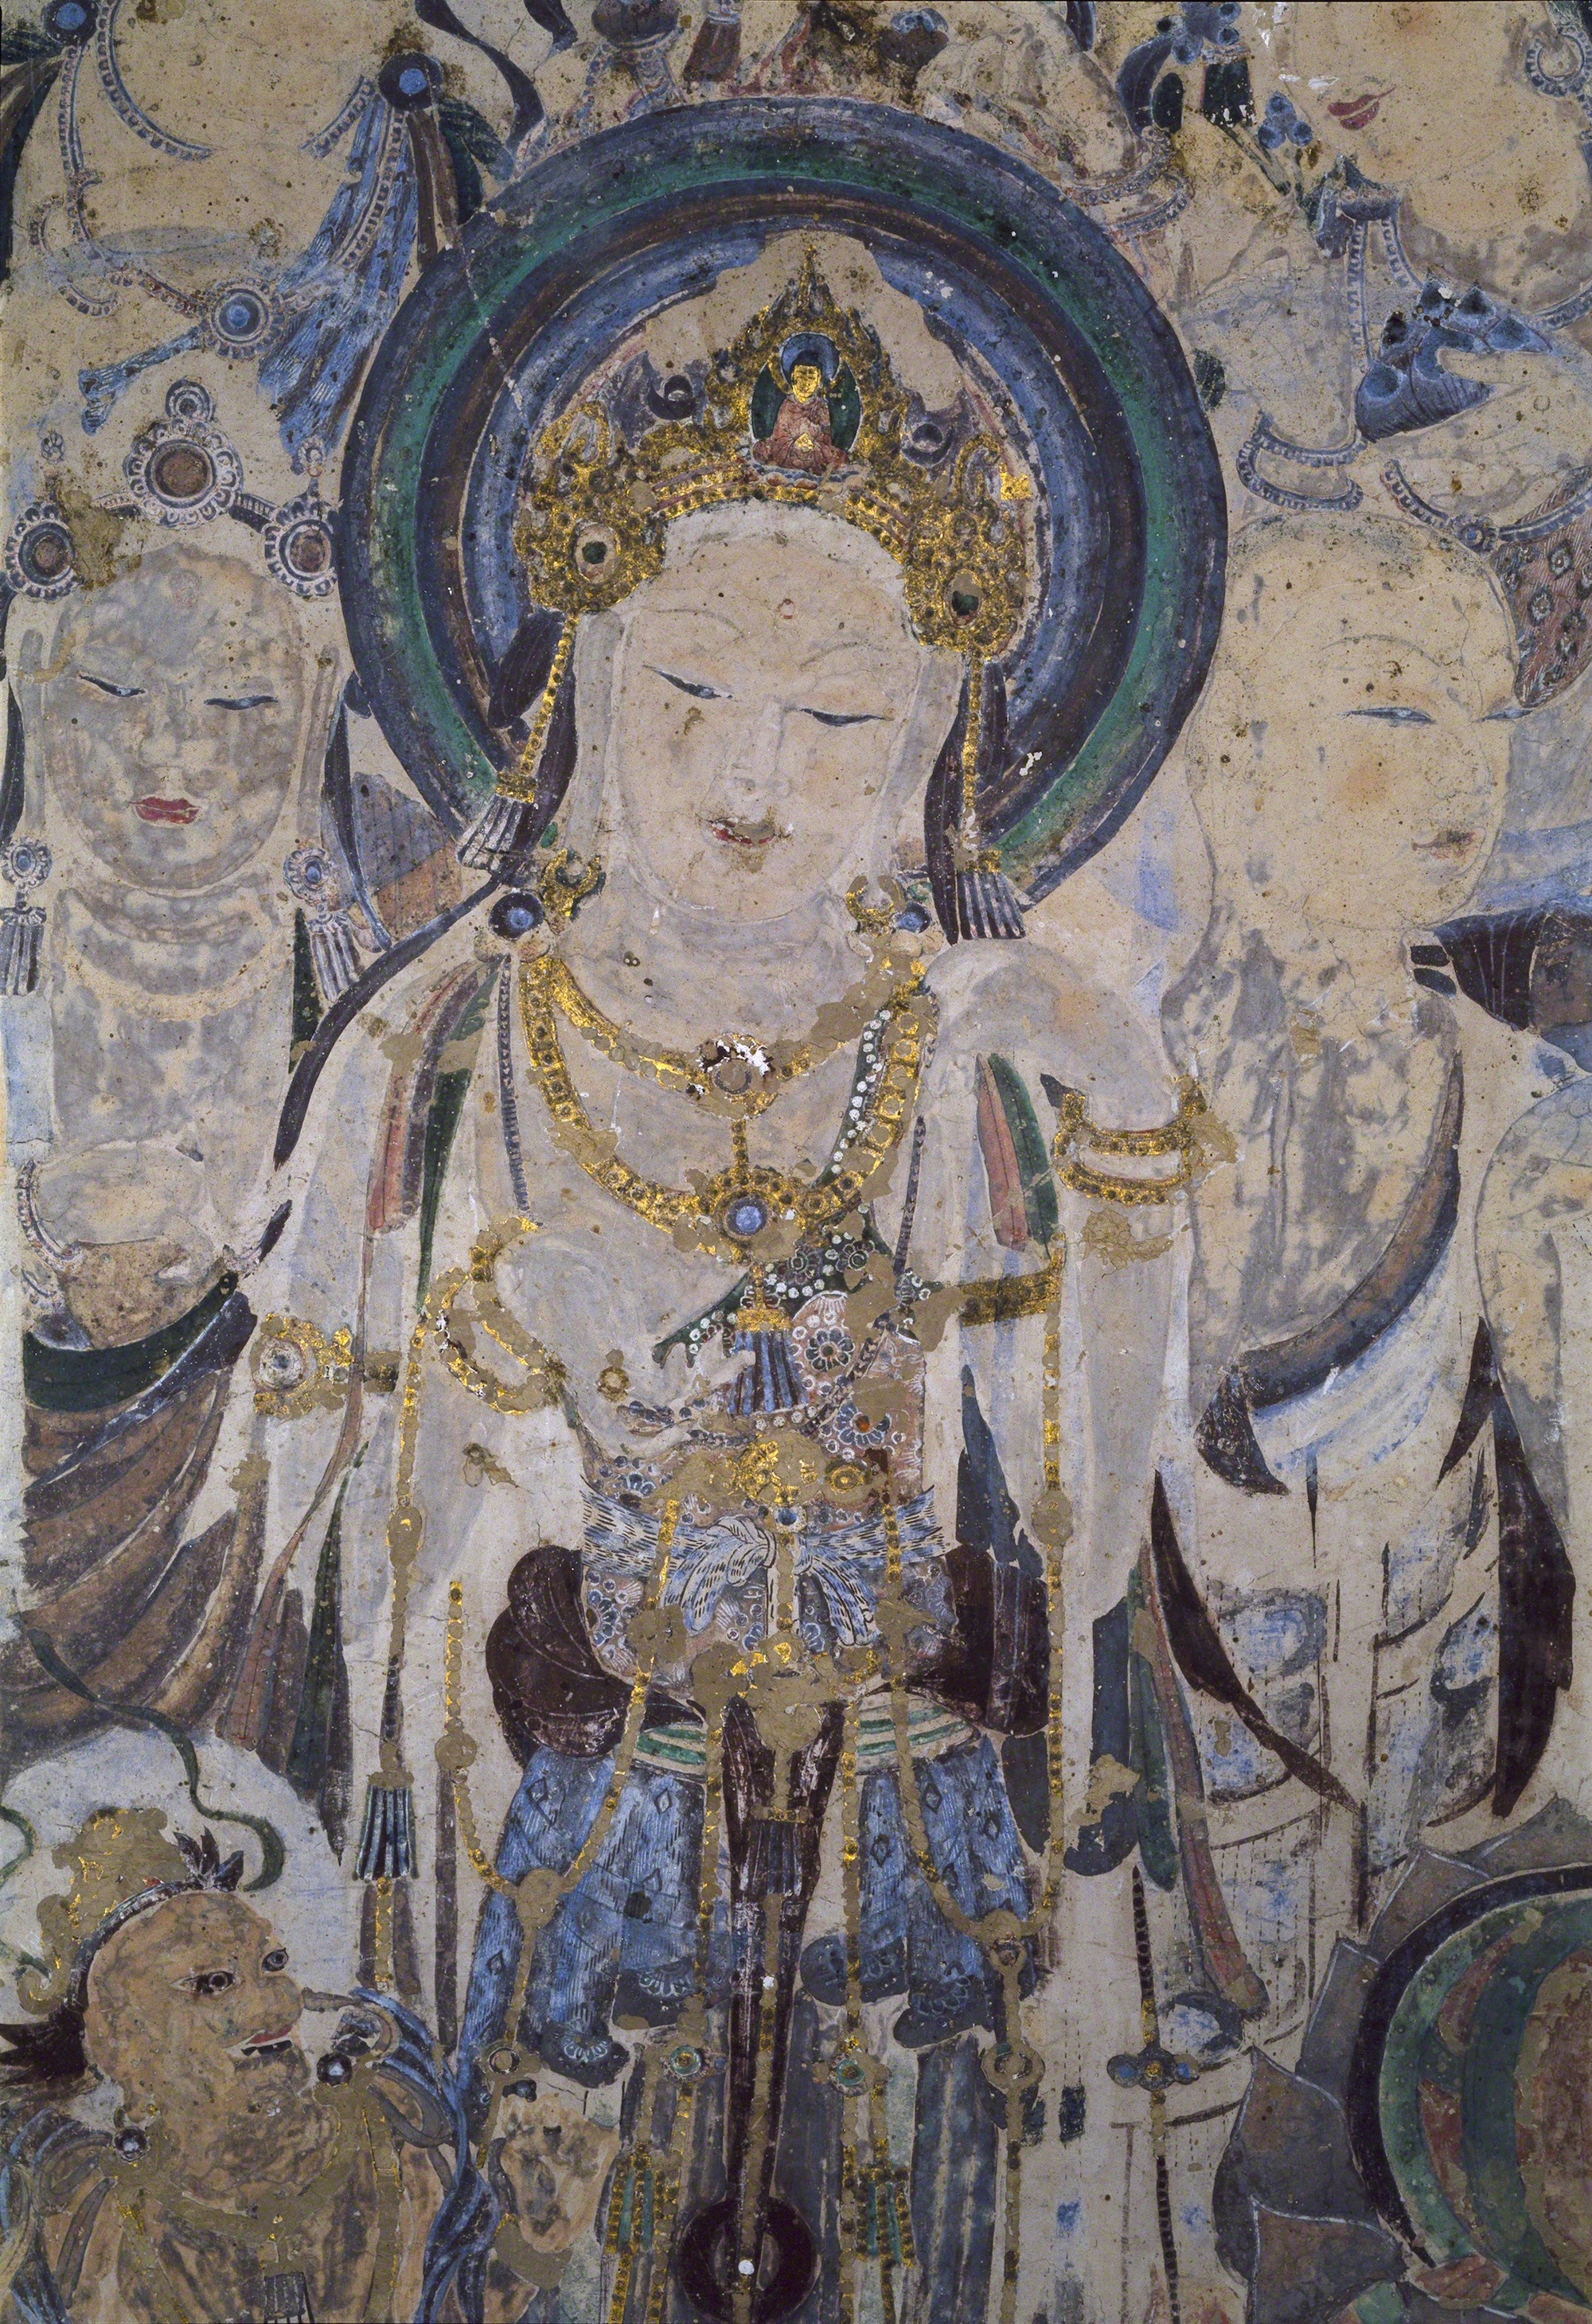 dunhuang-research-academy-preserves-art-from-the-mogao-grottoes-2